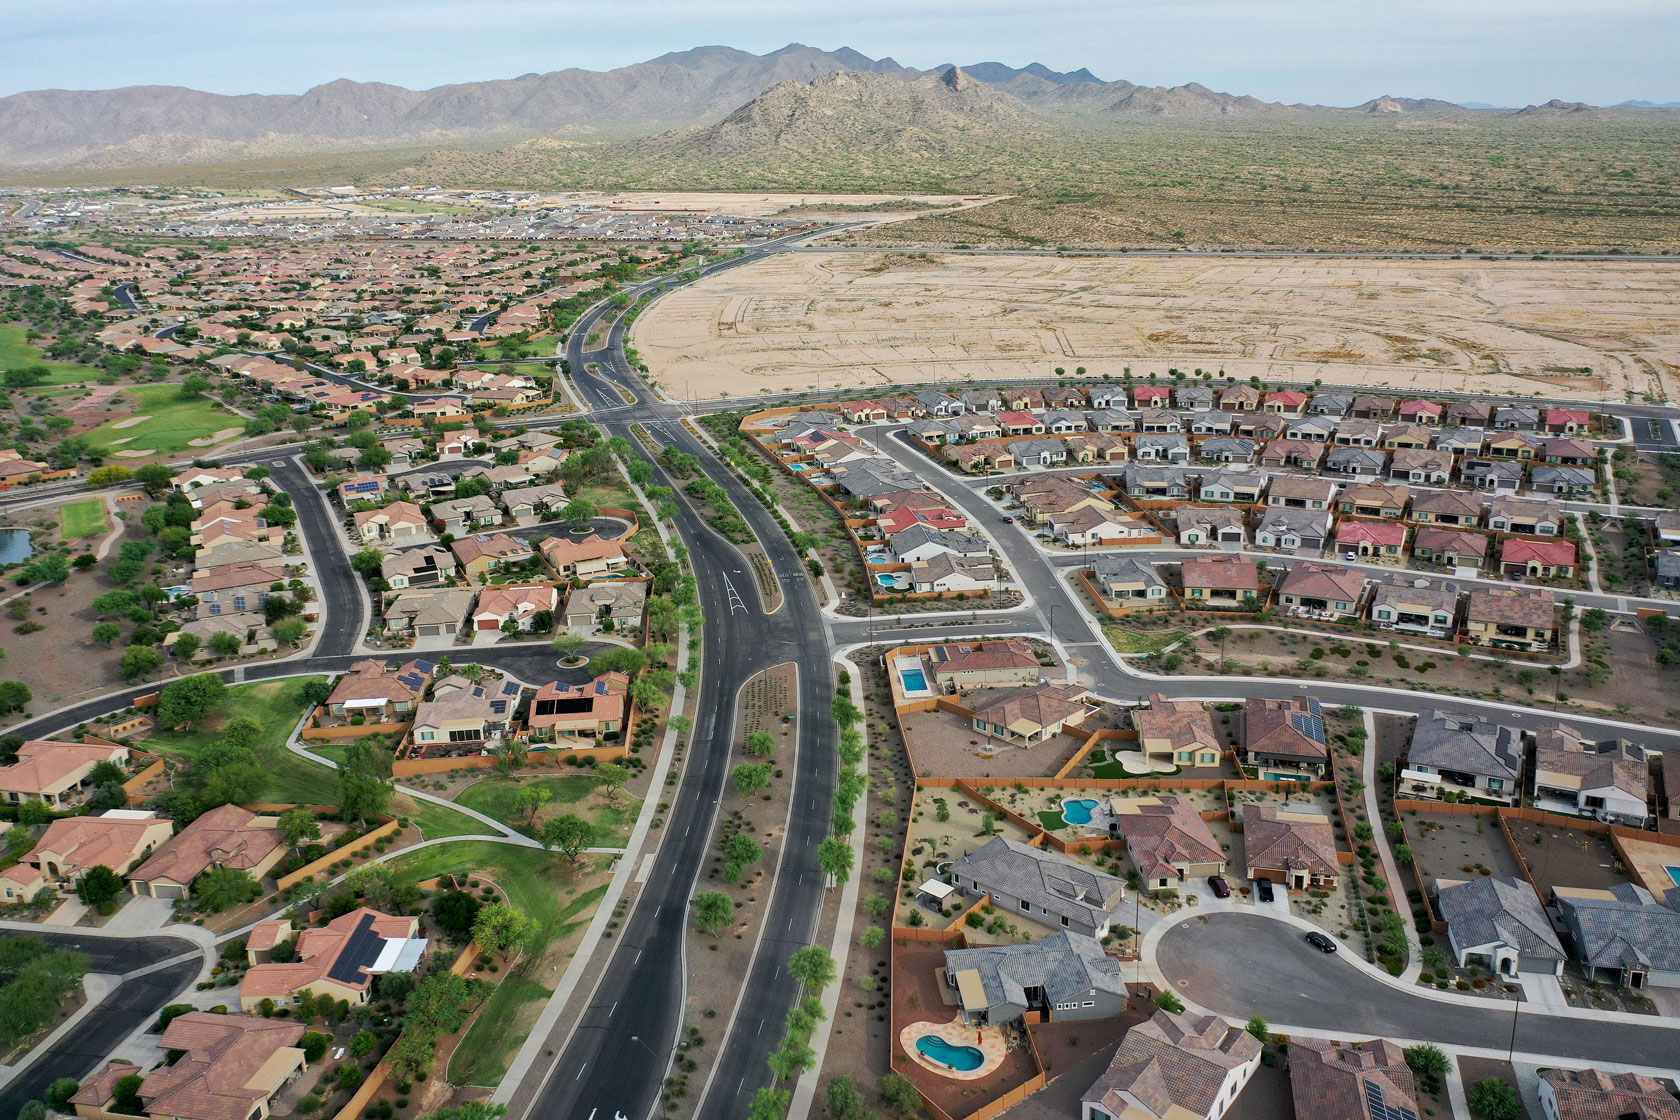 An aerial view of the city of Buckeye, Arizona, with mountains in the background.